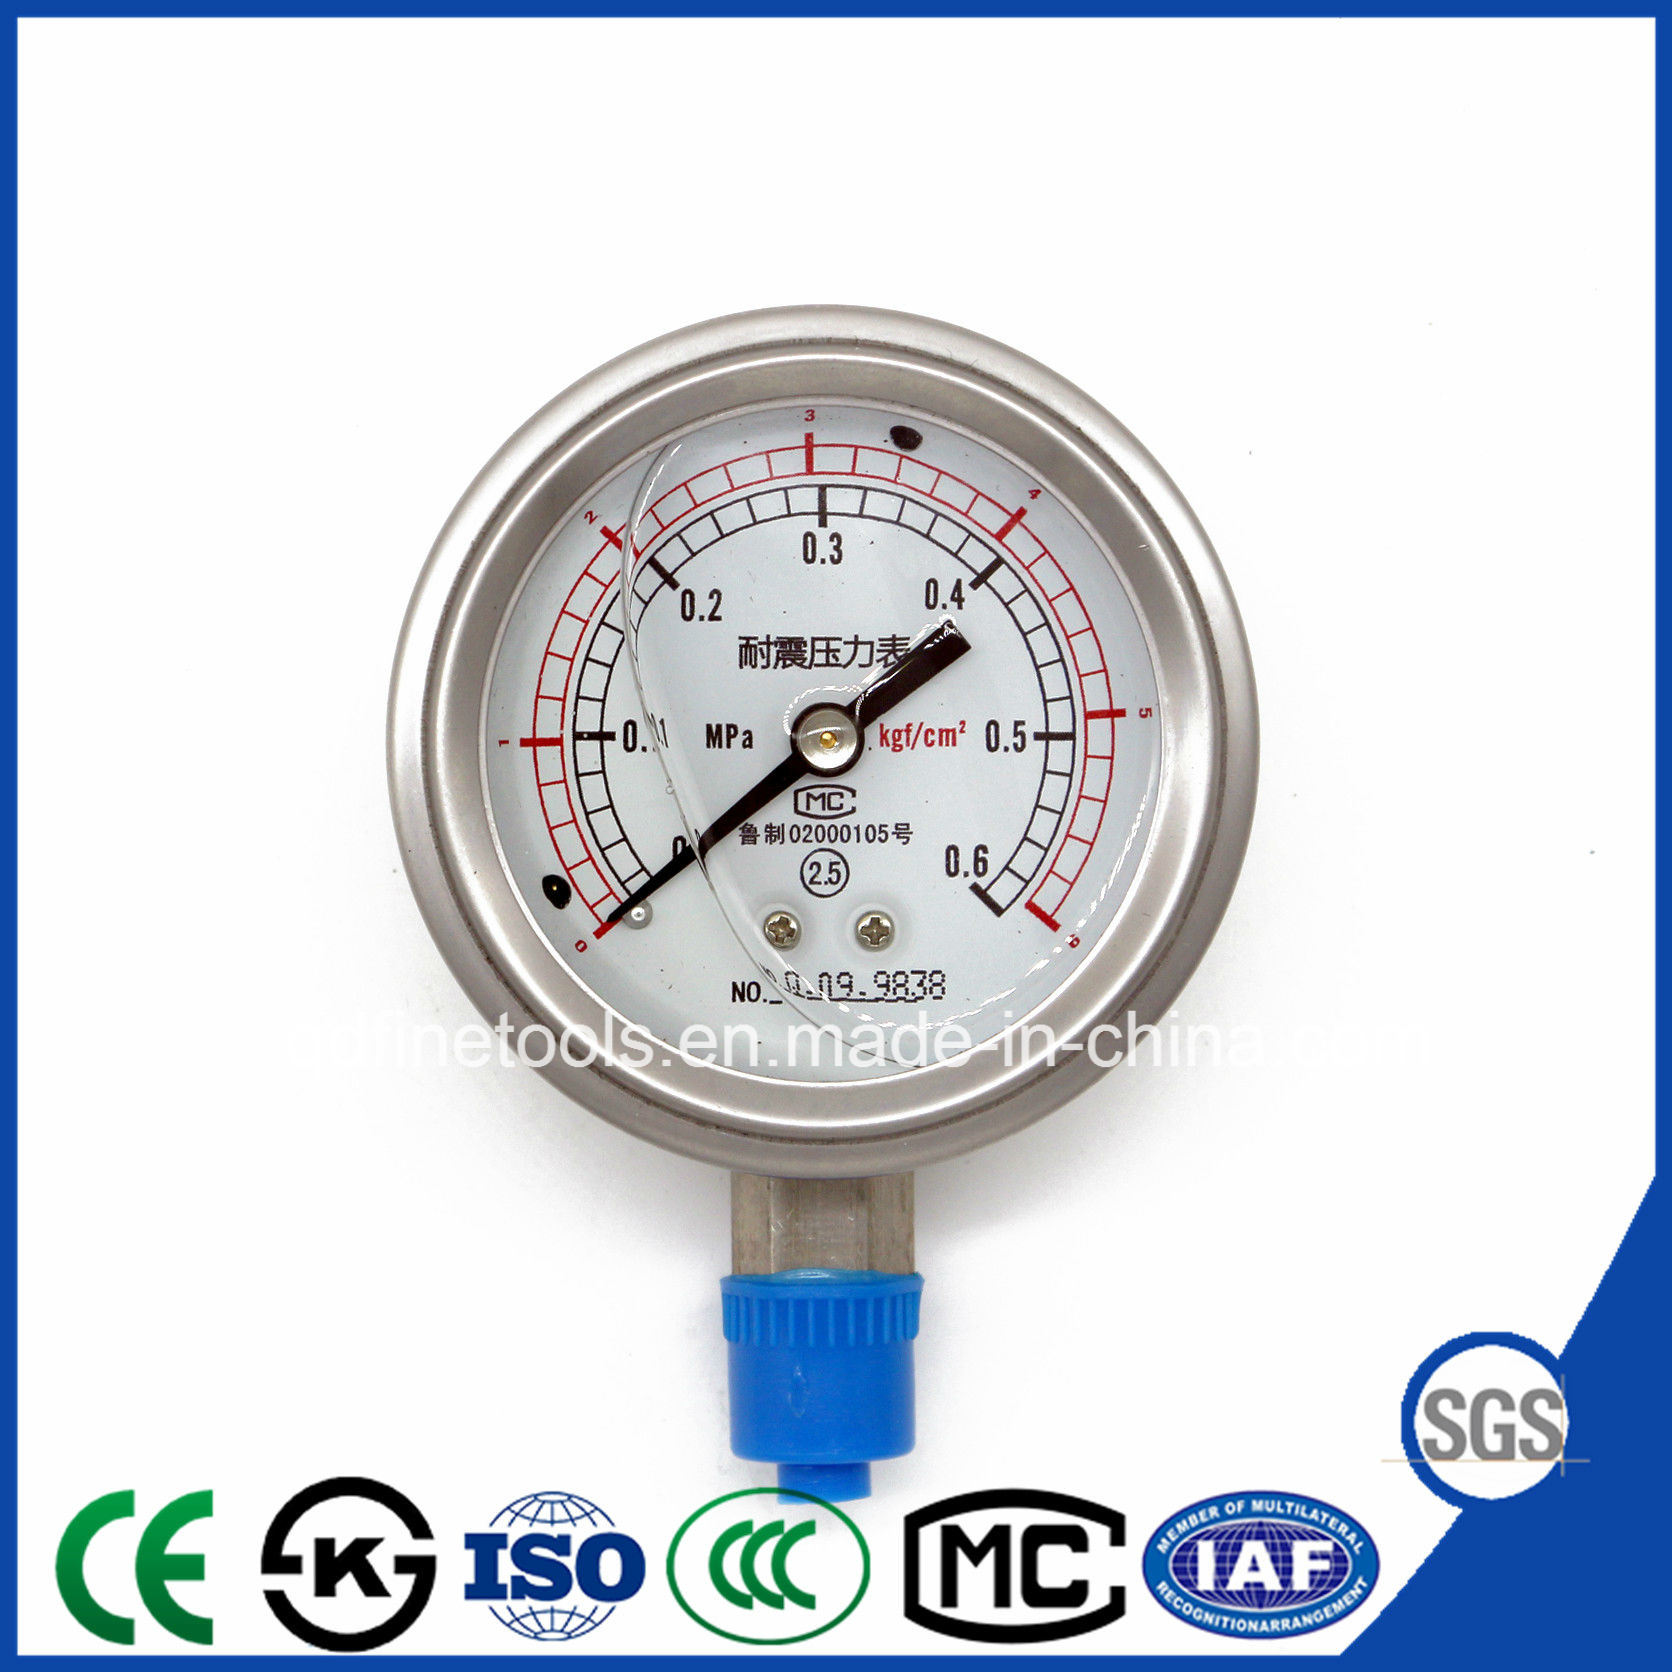 High Quality and Best-Selling Special Diaphragm Pressure Gauge